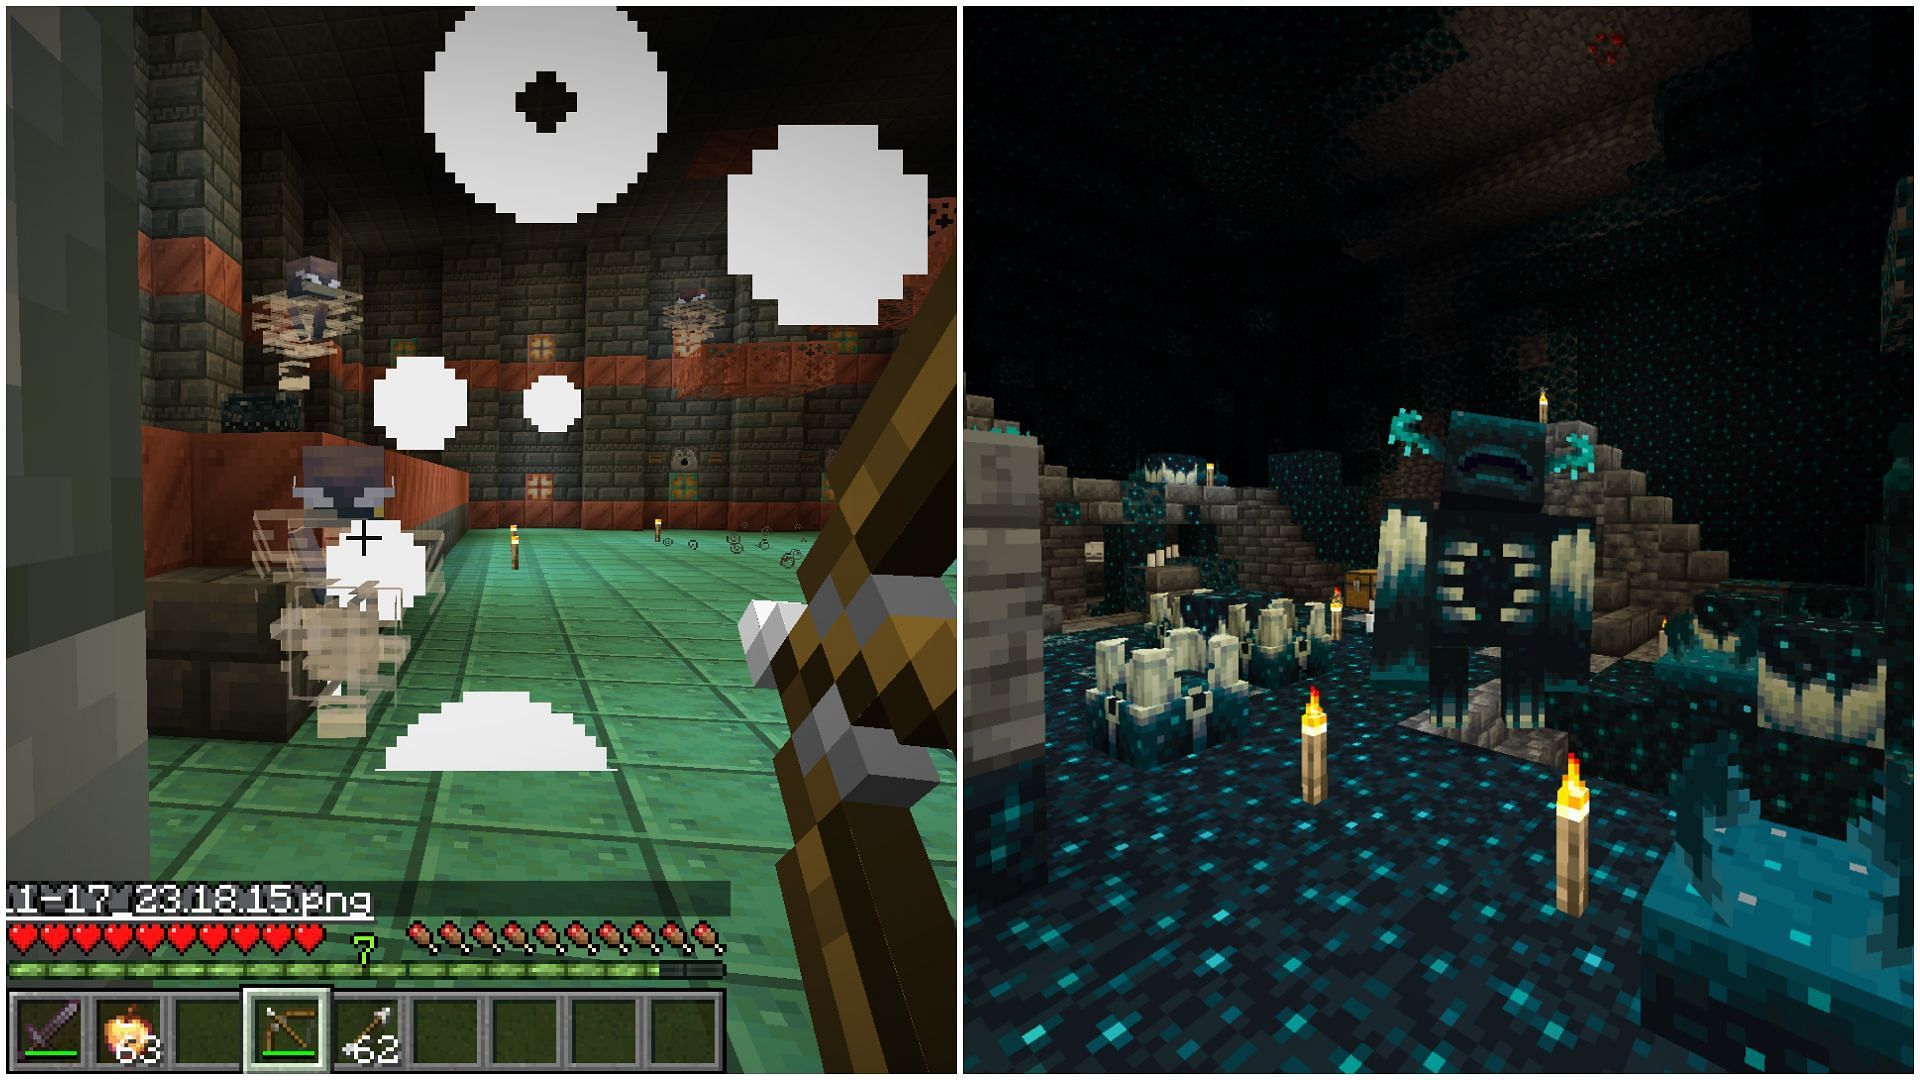 Trial chambers have a lot more to offer than ancient city (Image via Mojang Studios)